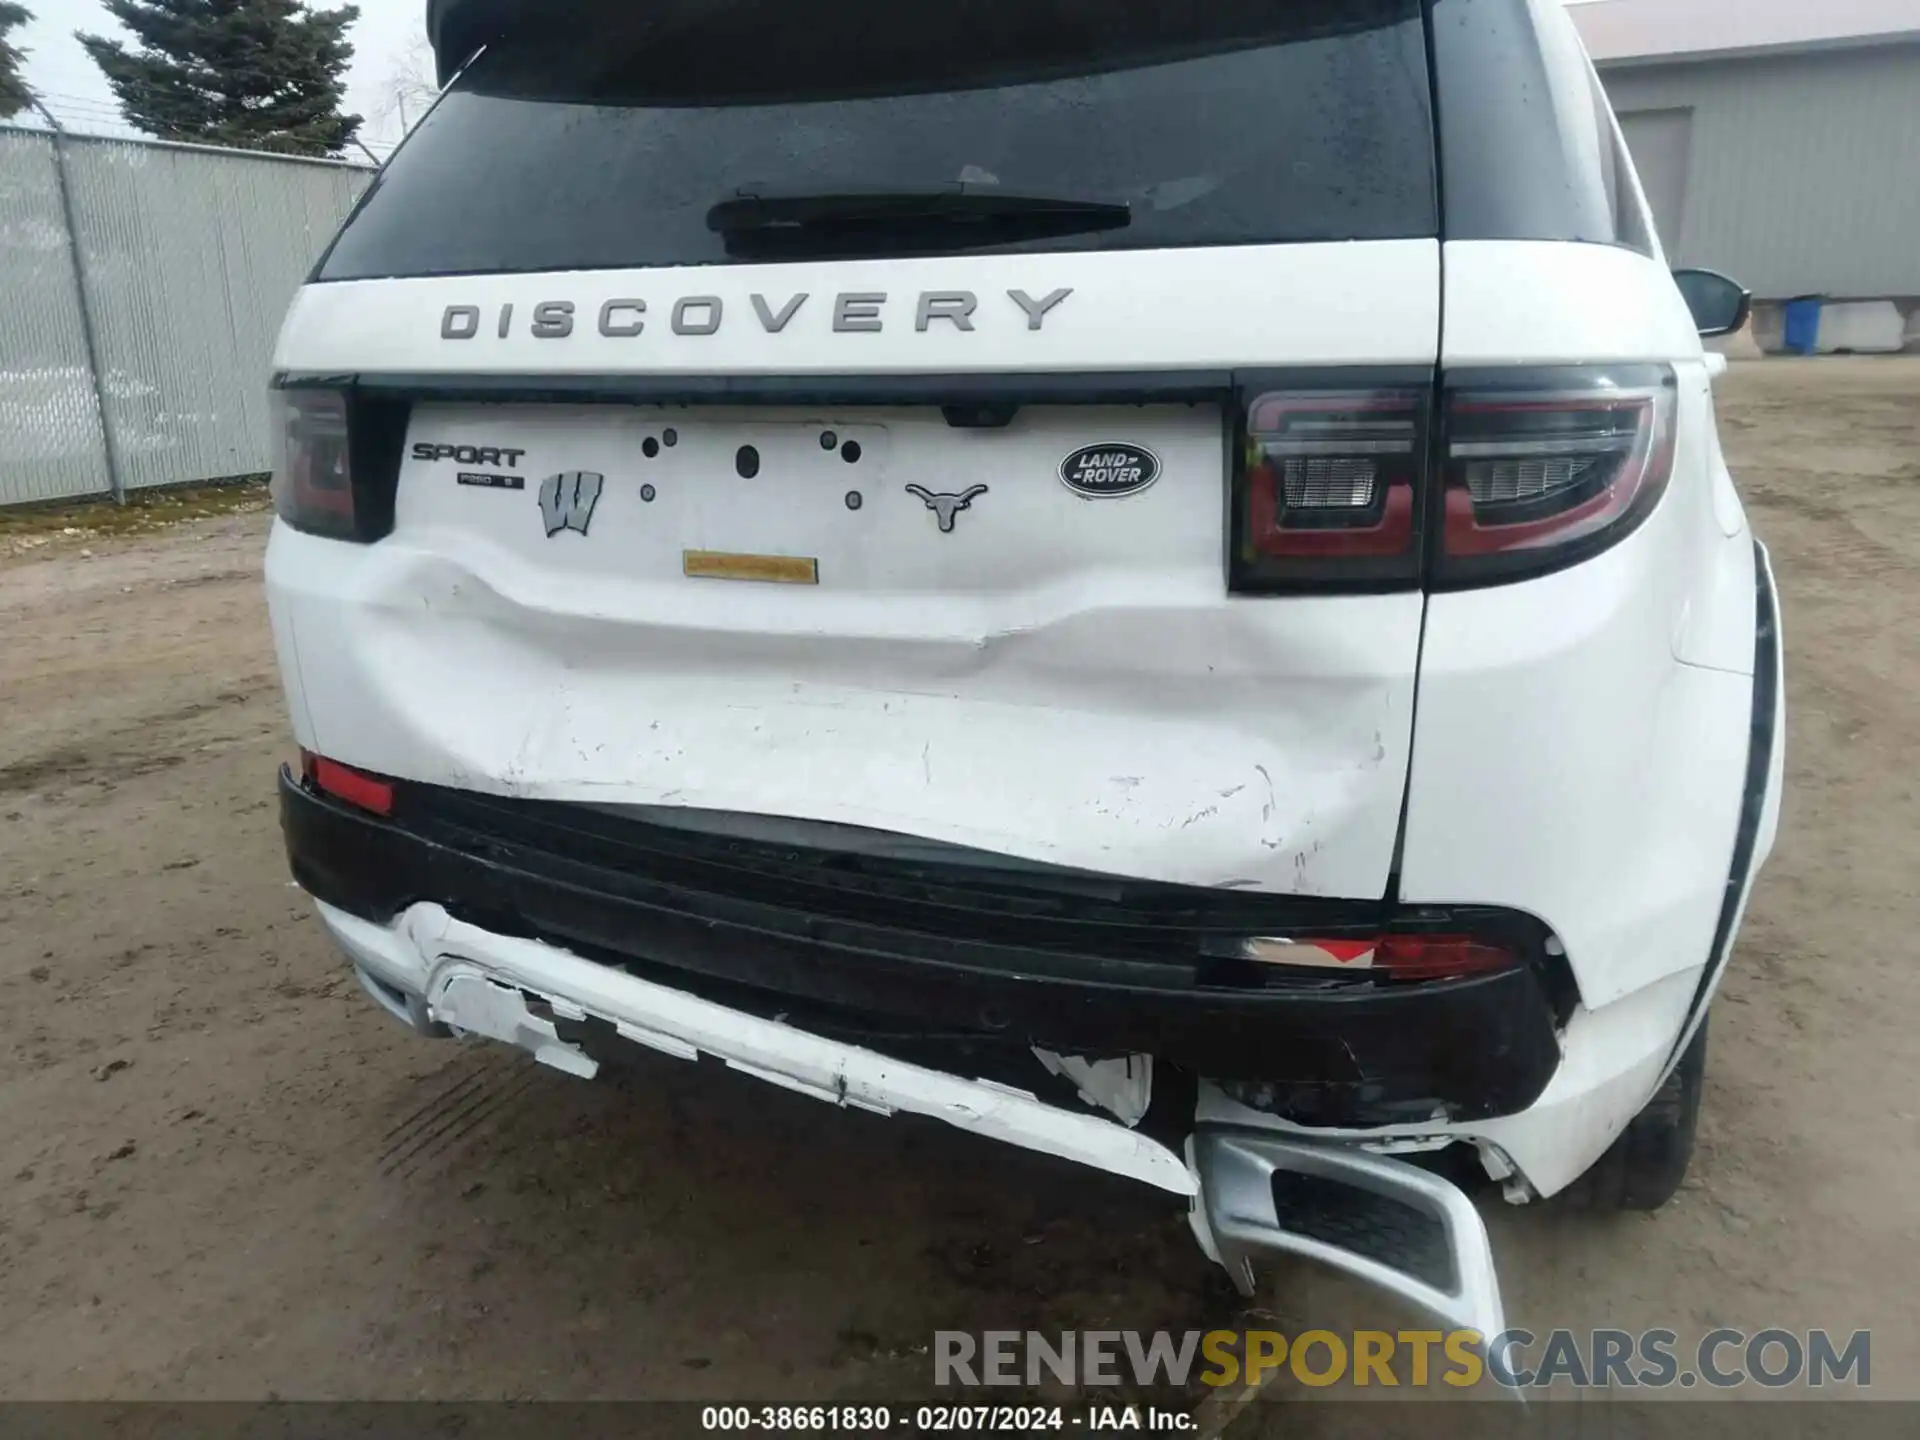 6 Photograph of a damaged car SALCT2FXXLH859485 LAND ROVER DISCOVERY SPORT 2020